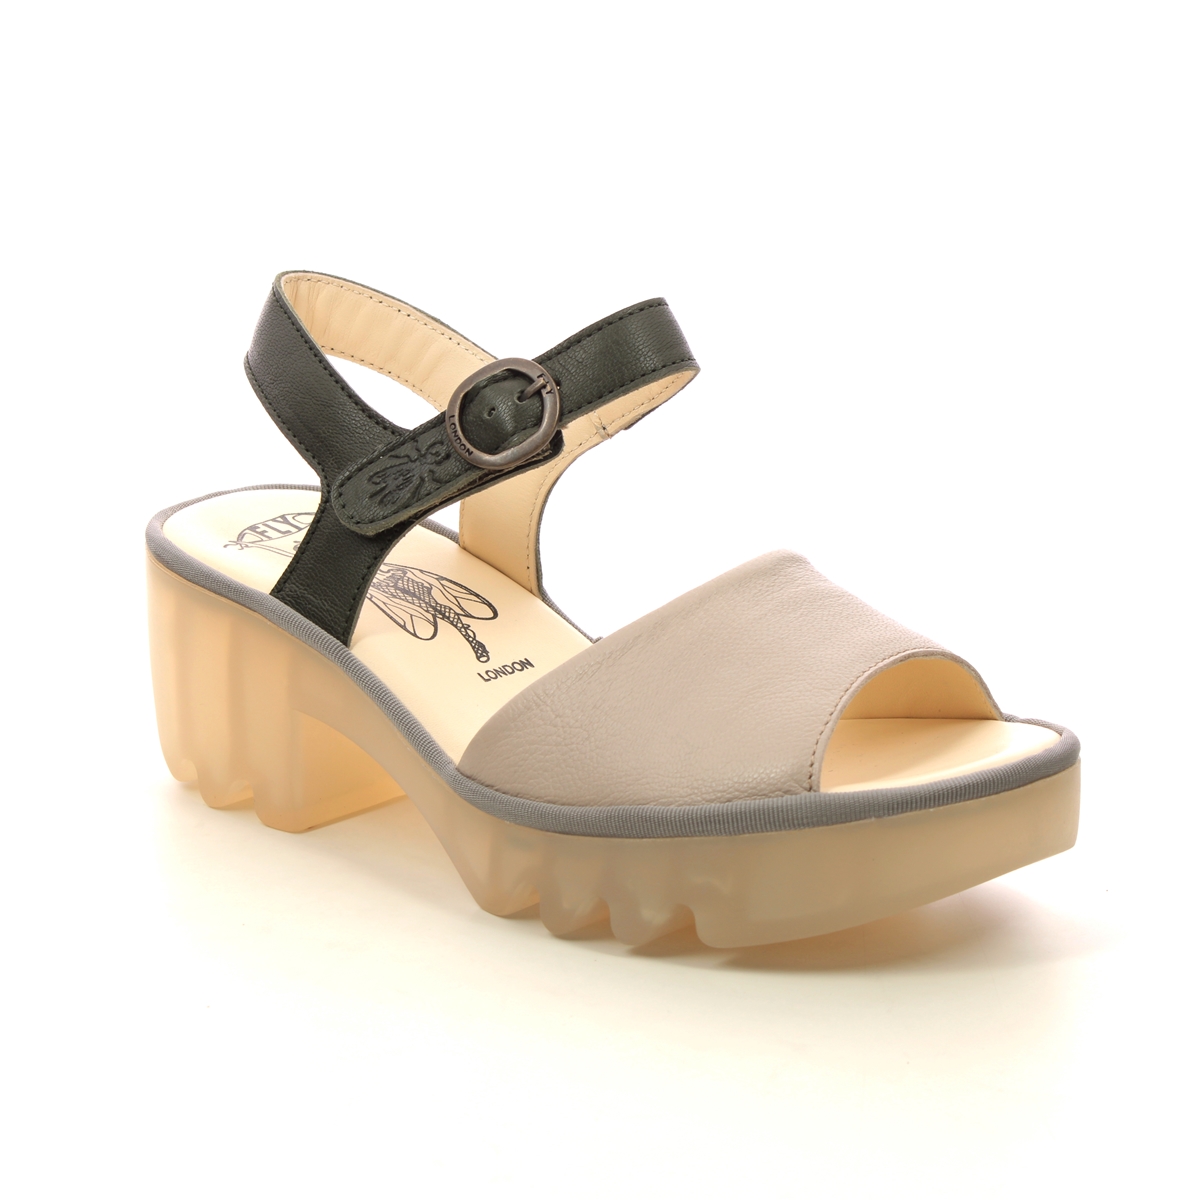 Fly London Tull Thalia Light taupe Womens Wedge Sandals P501503-002 in a Plain Leather and Textile in Size 37